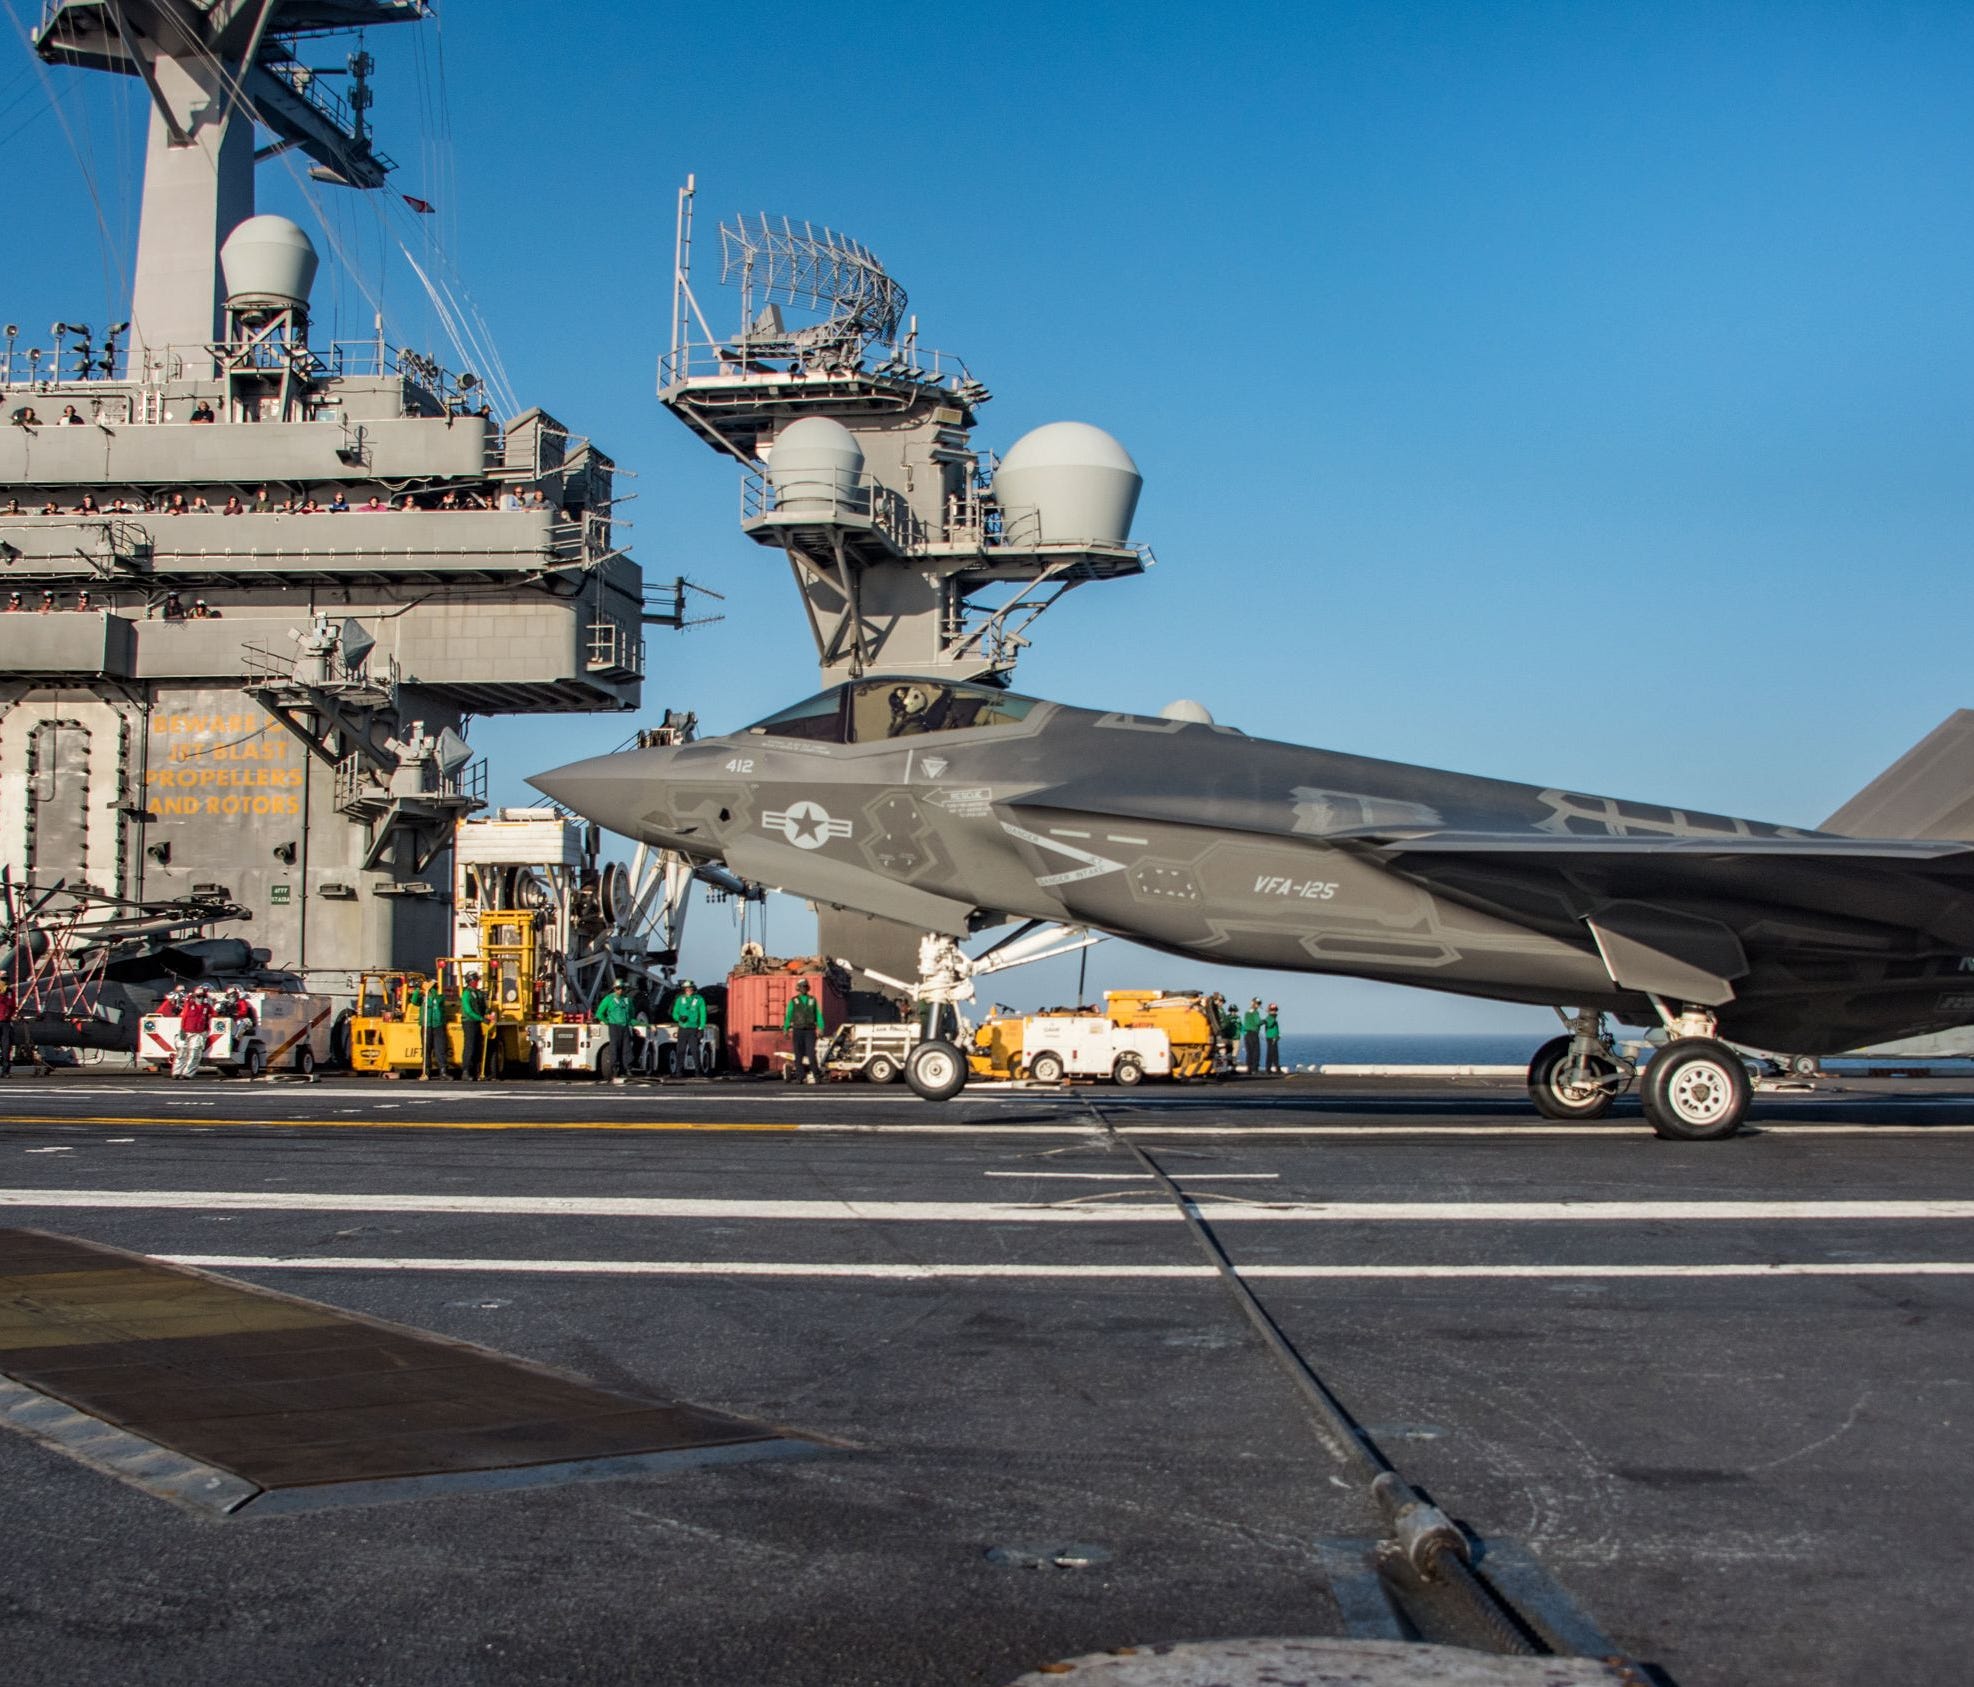 Some fliers believe that former Navy pilots execute harder landings because of their experience on aircraft carriers, but our pilot columnist dispels the myth.